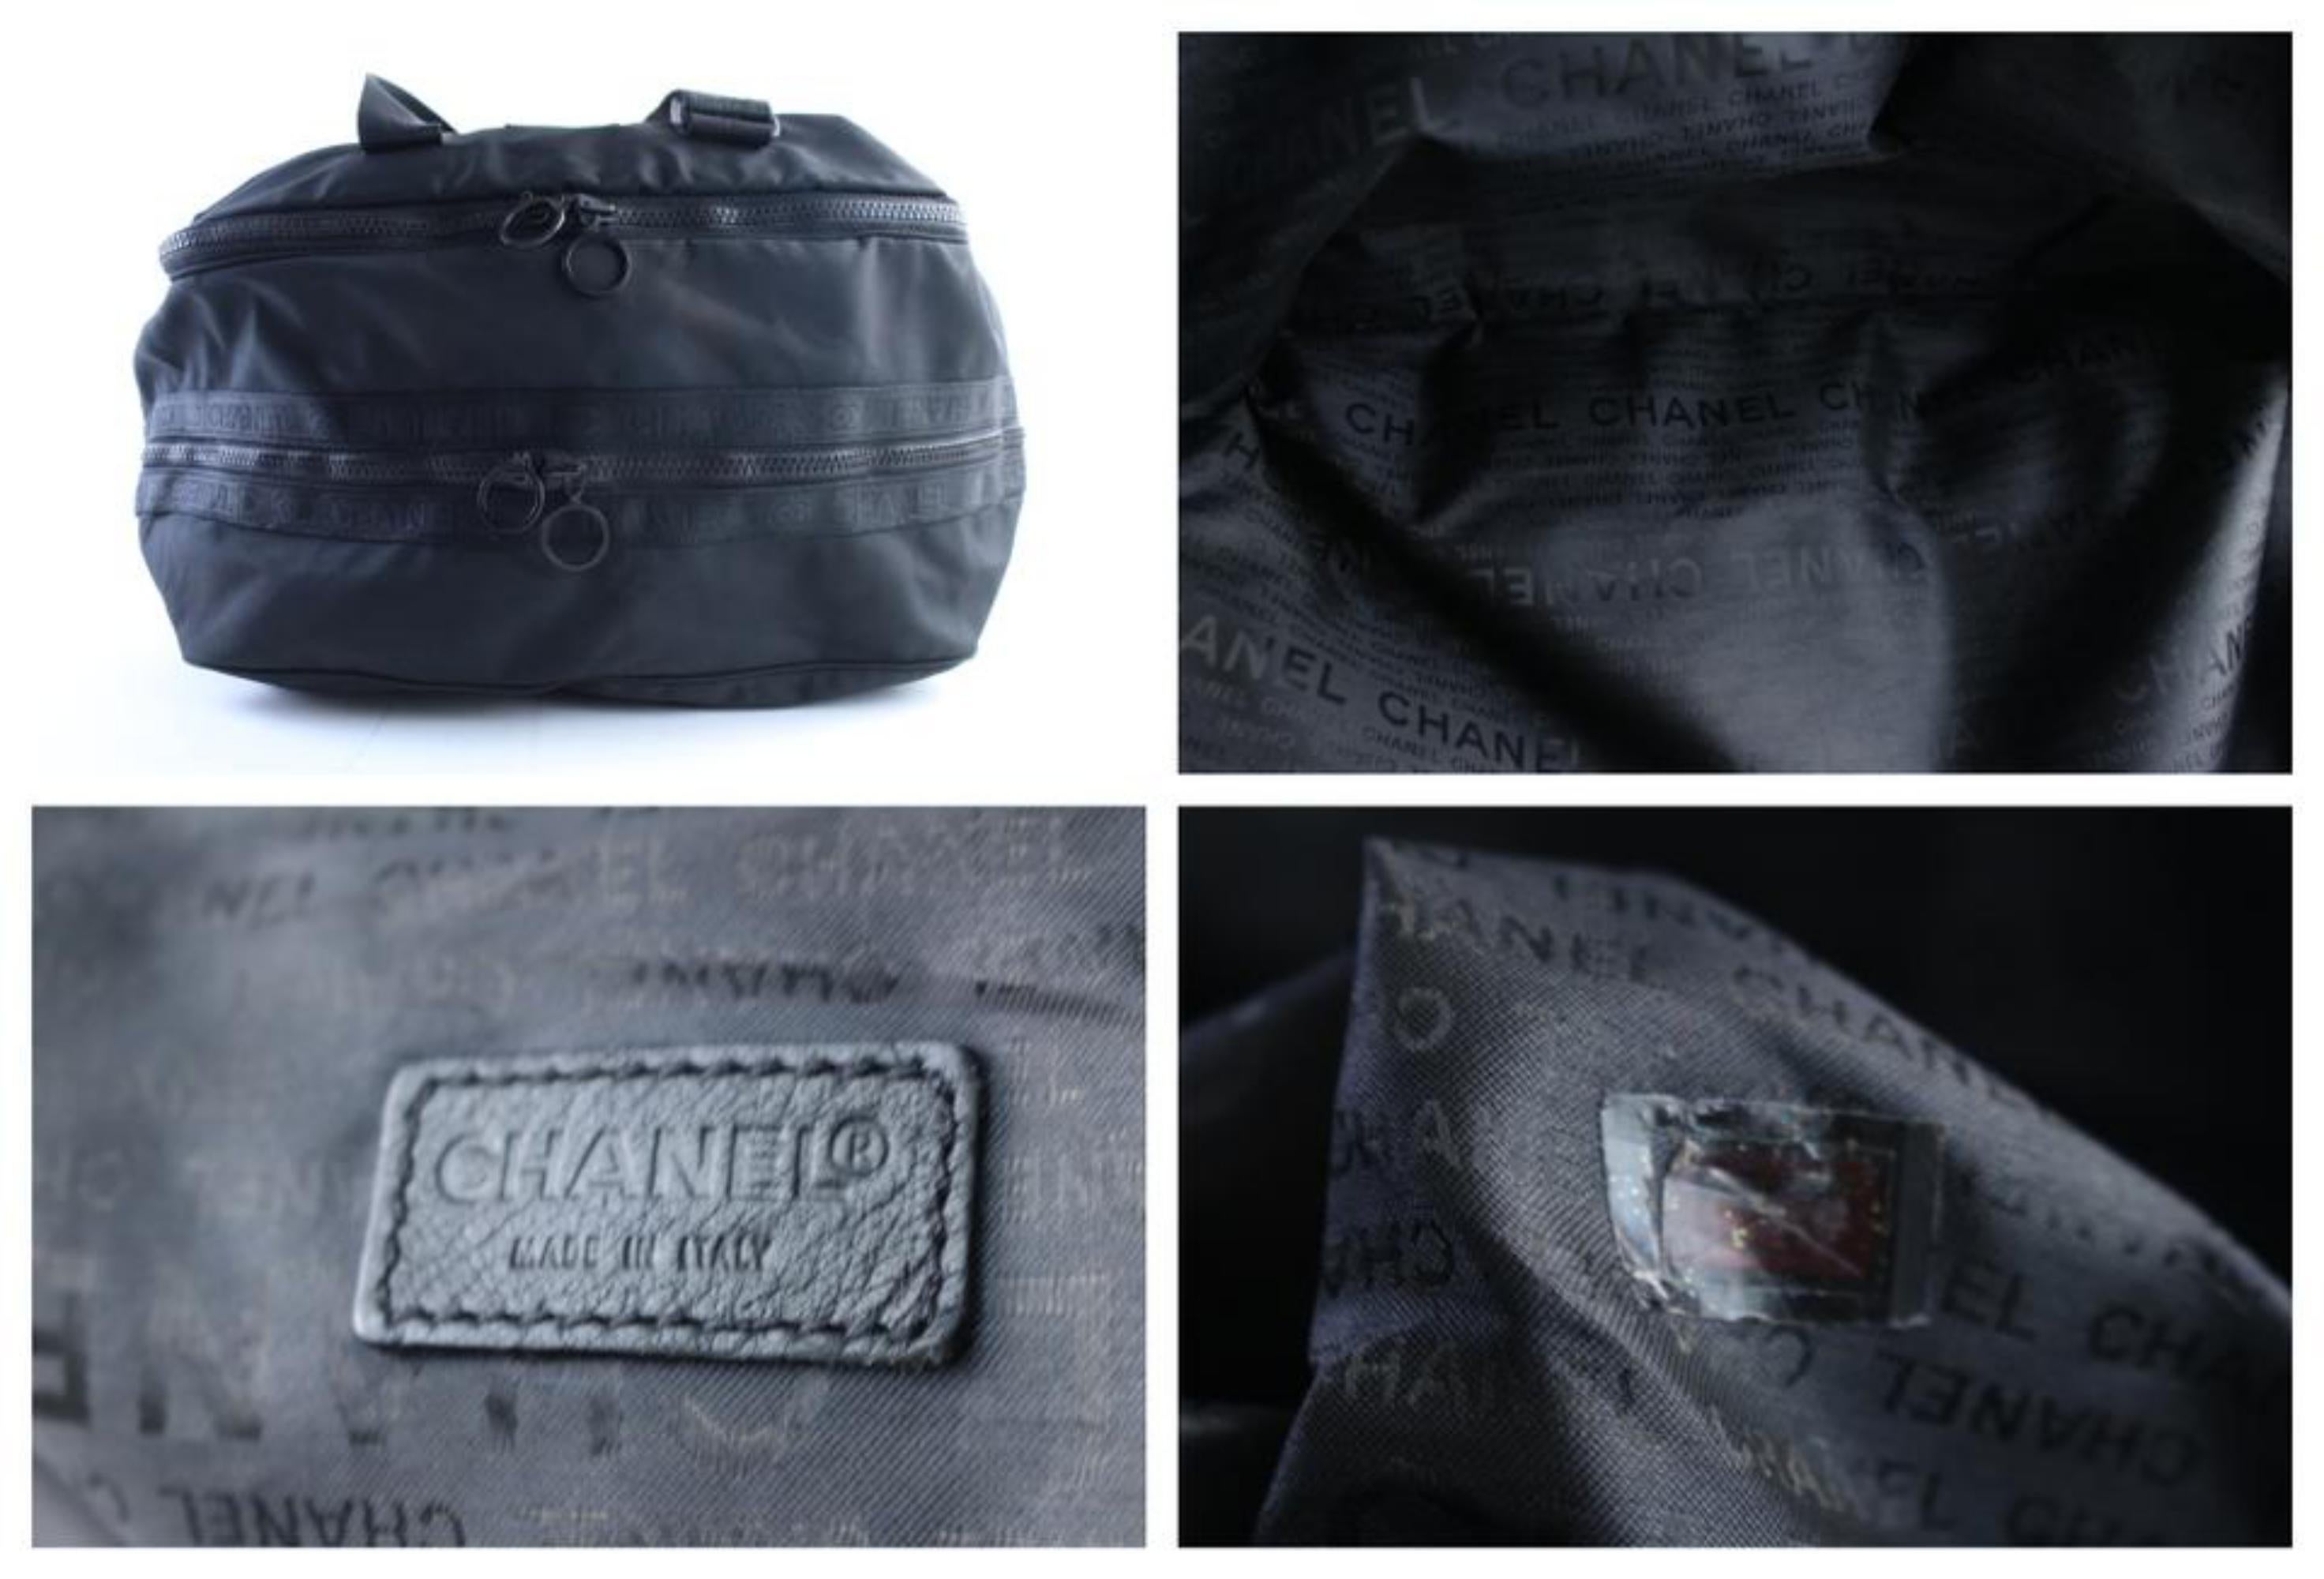 Chanel Duffle Cc Sports Boston 226424 Black Canvas Weekend/Travel Bag In Good Condition For Sale In Forest Hills, NY